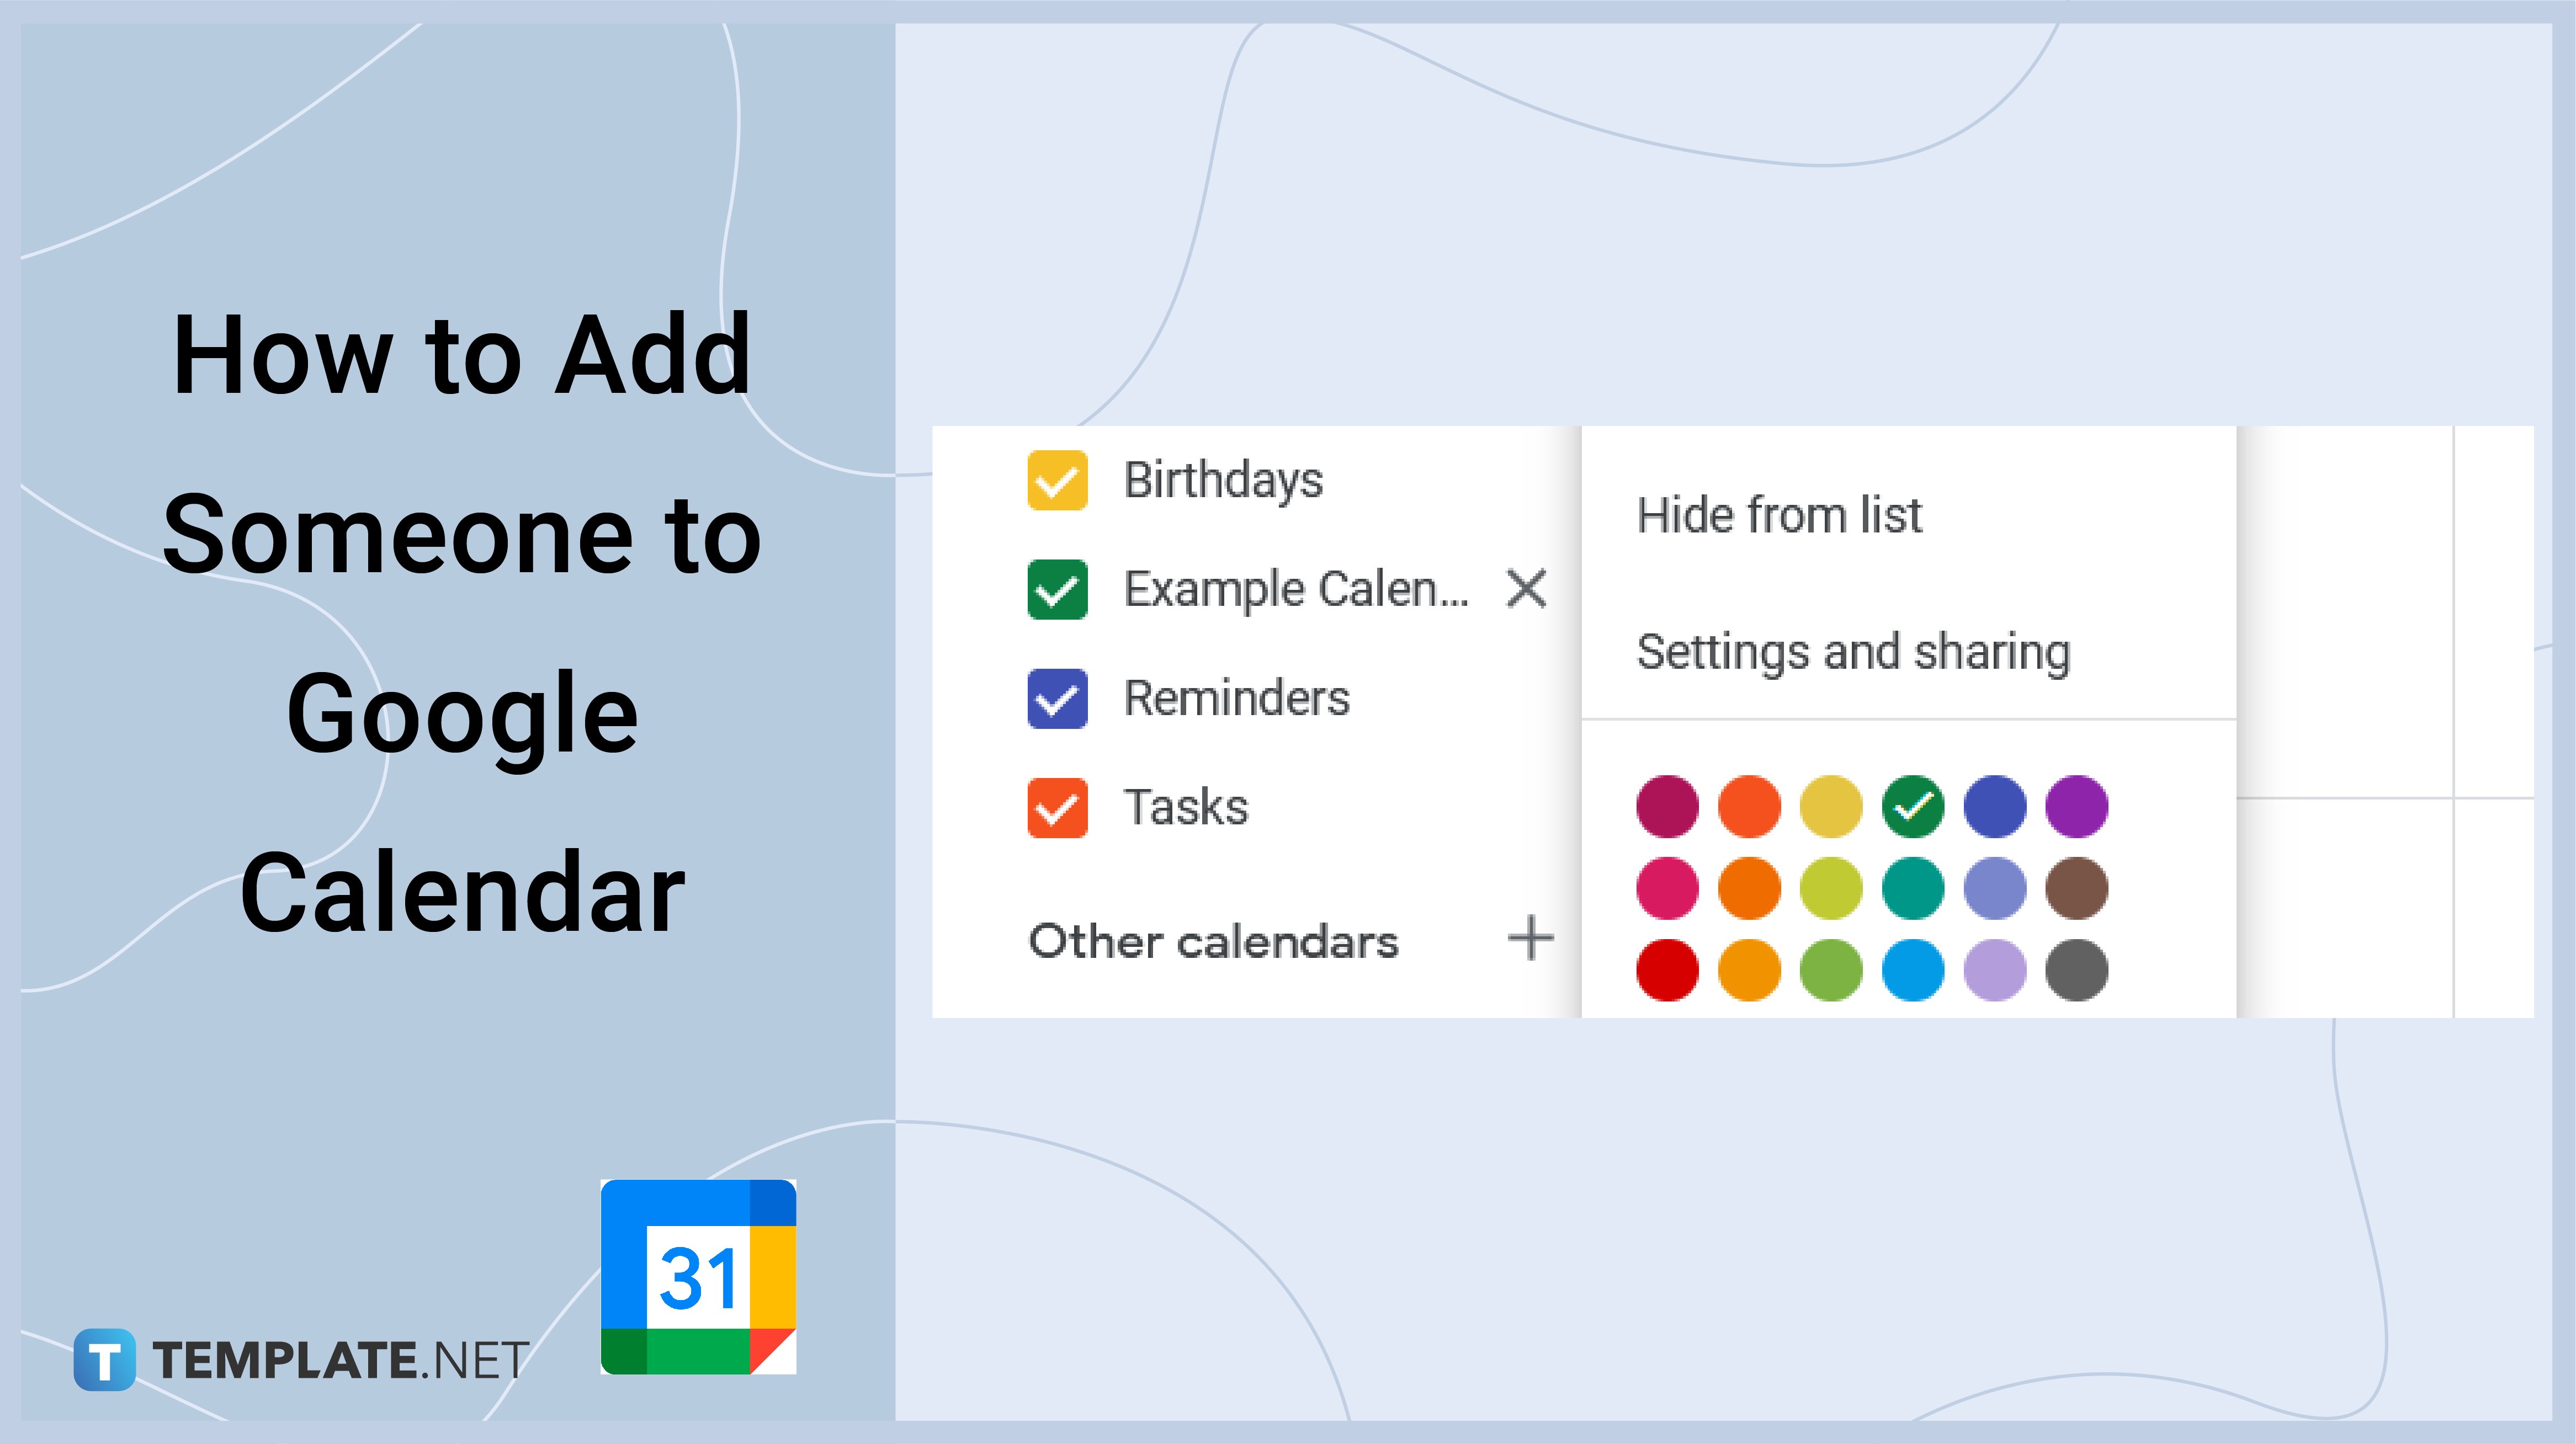 How to Add Someone to Google Calendar